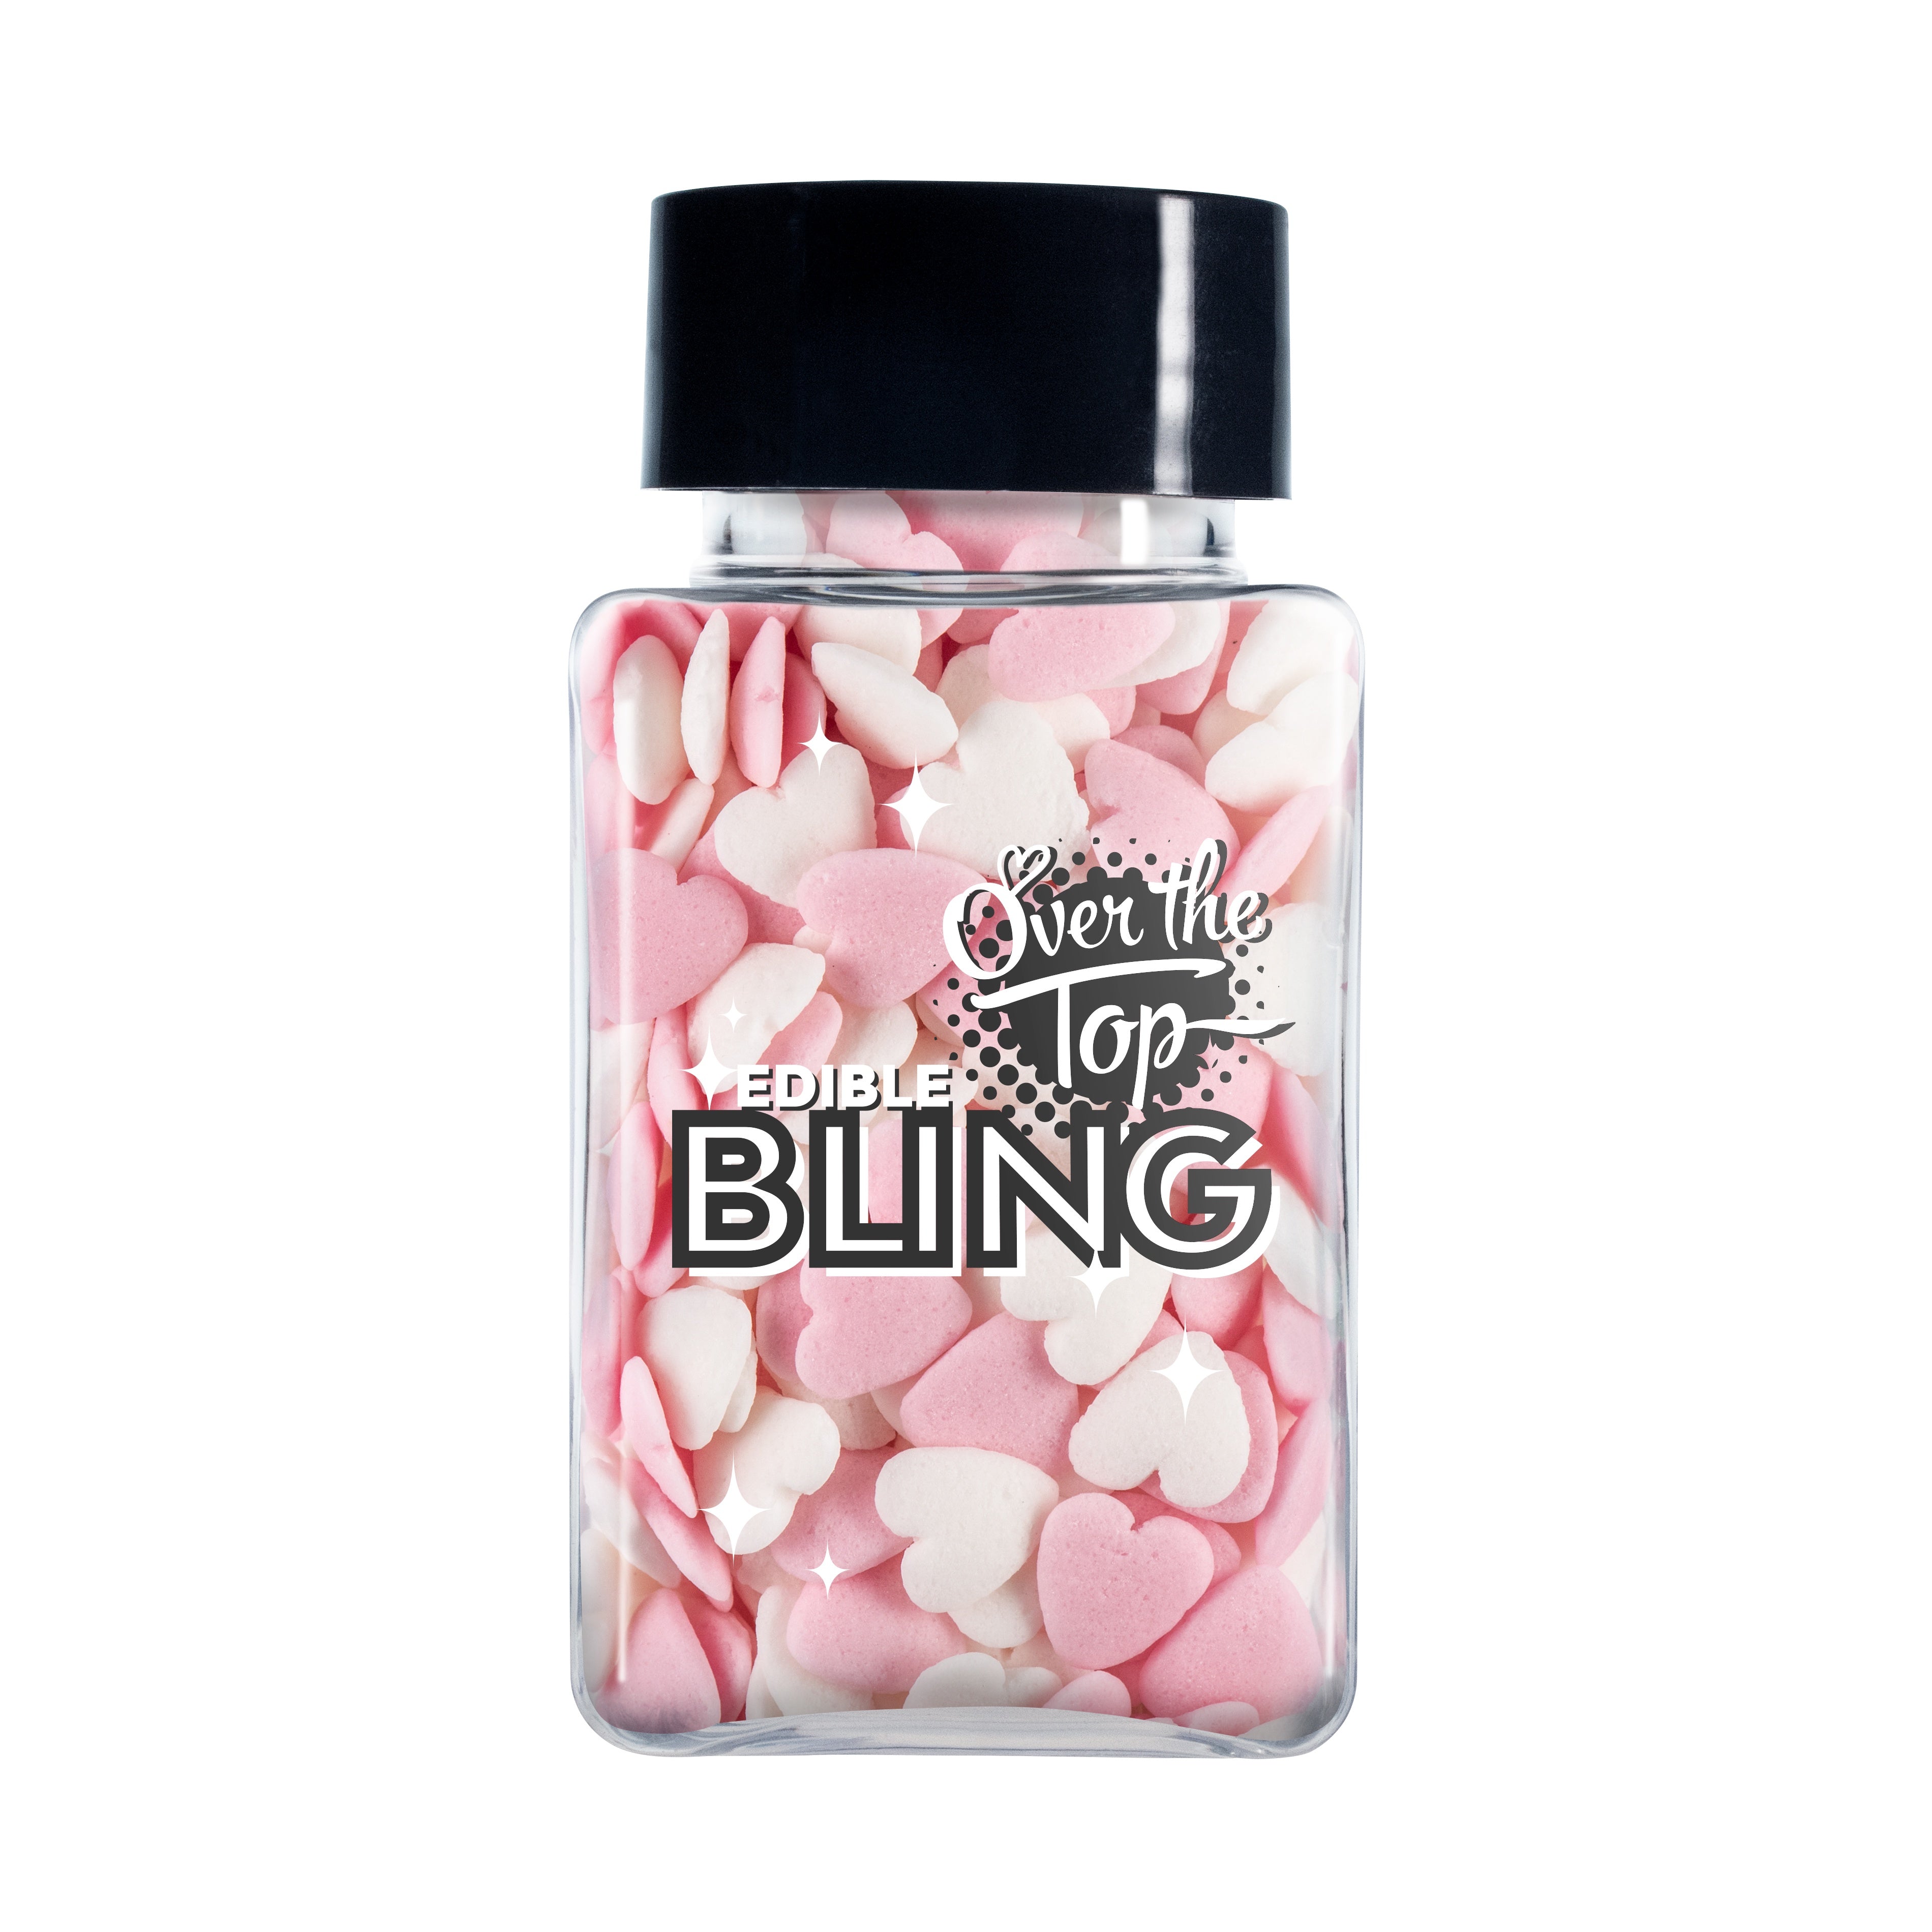 Over The Top Edible Bling Sprinkles - Love Hearts White & Pink 55g